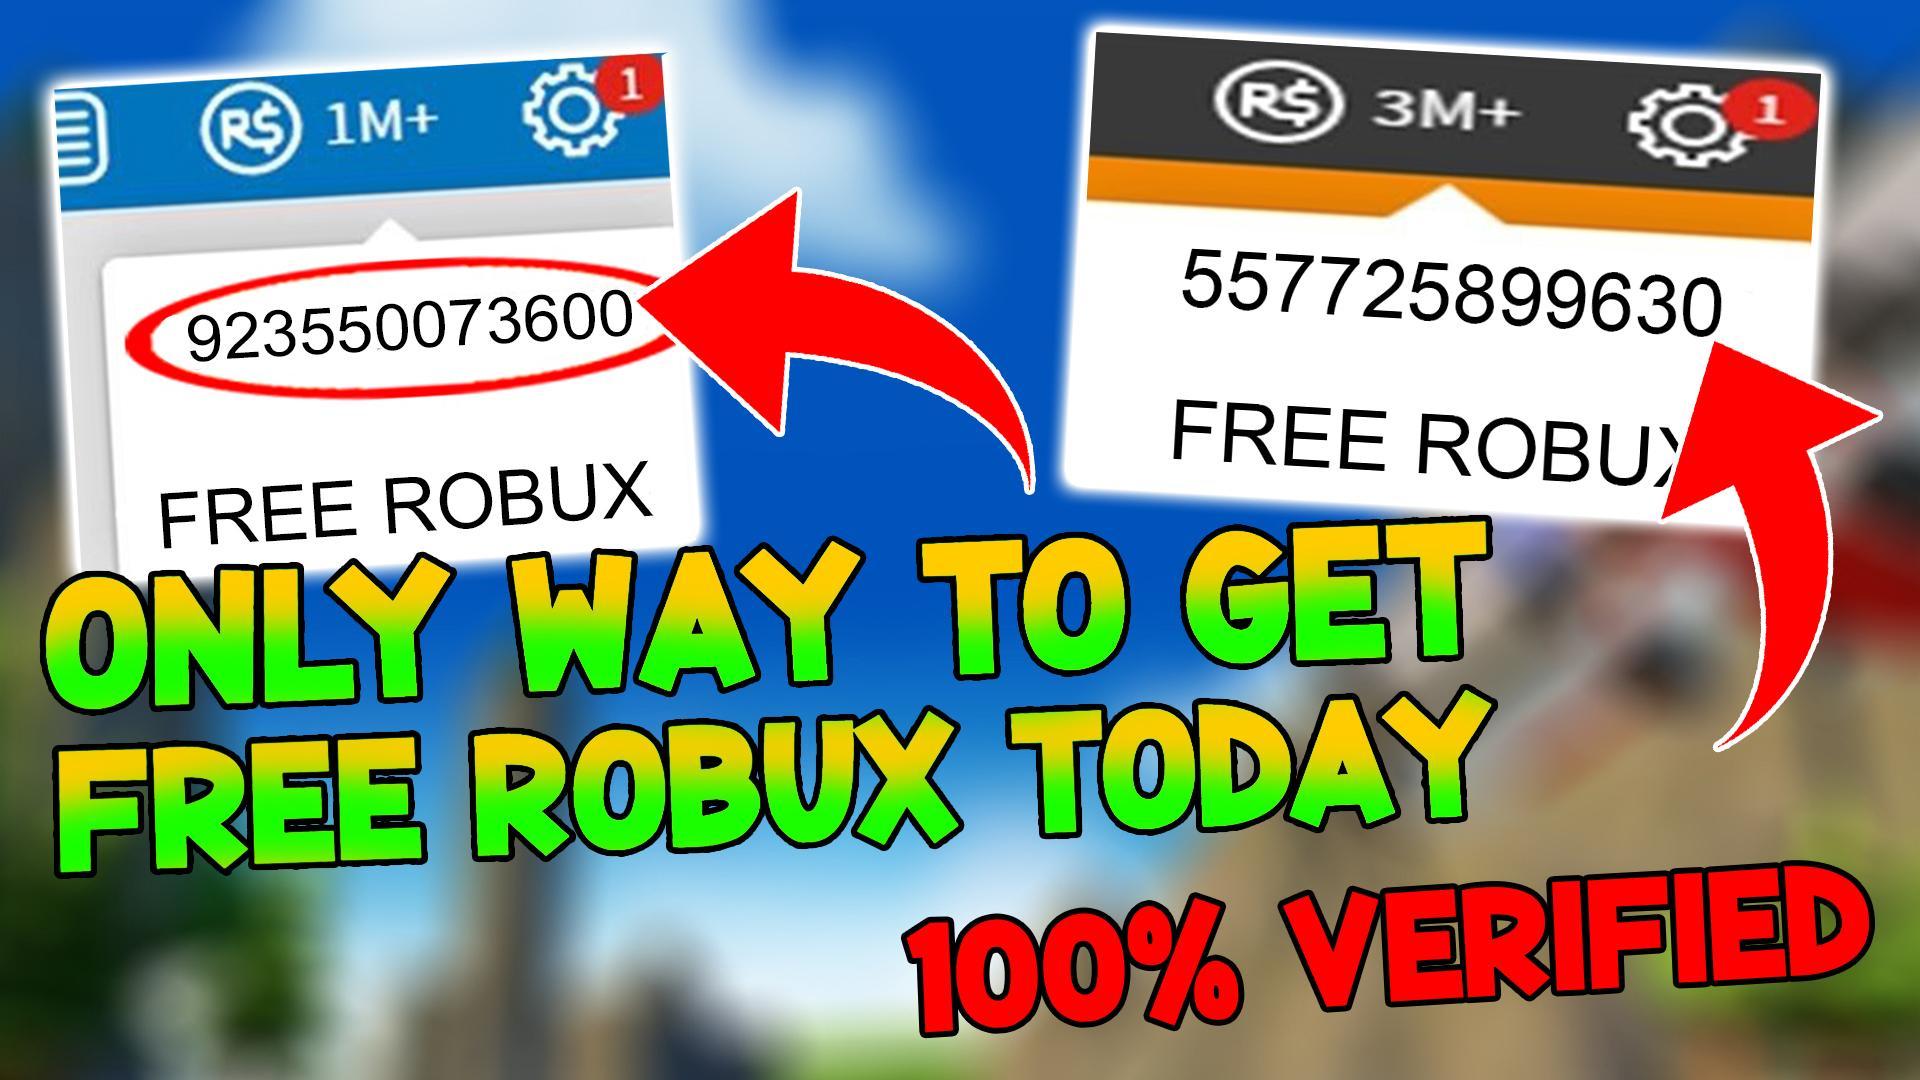 How To Get Unlimited Free Robux 2020 For Android Apk Download - 1m robux 2020